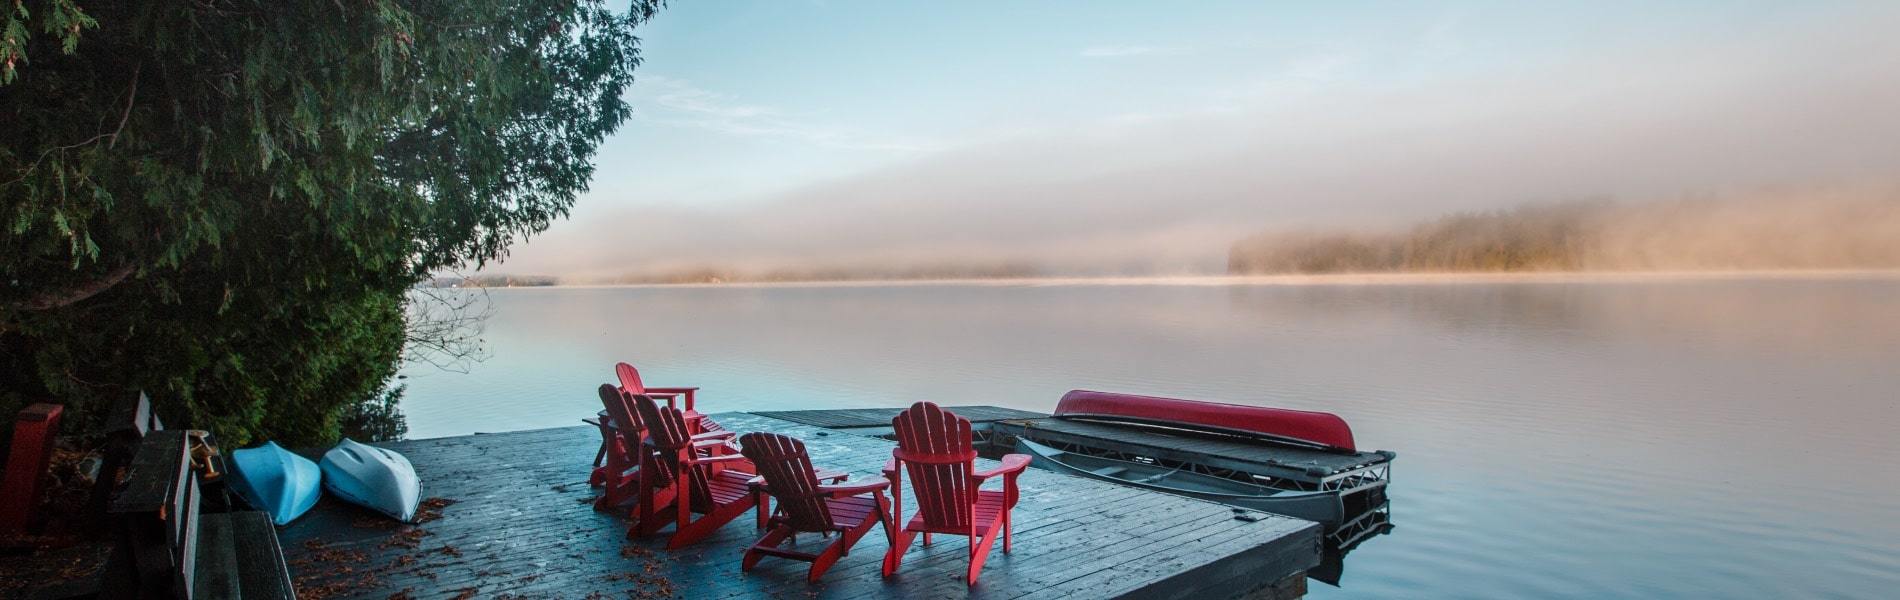 Muskoka chairs sitting on a dock overlooking a lake in Ontario